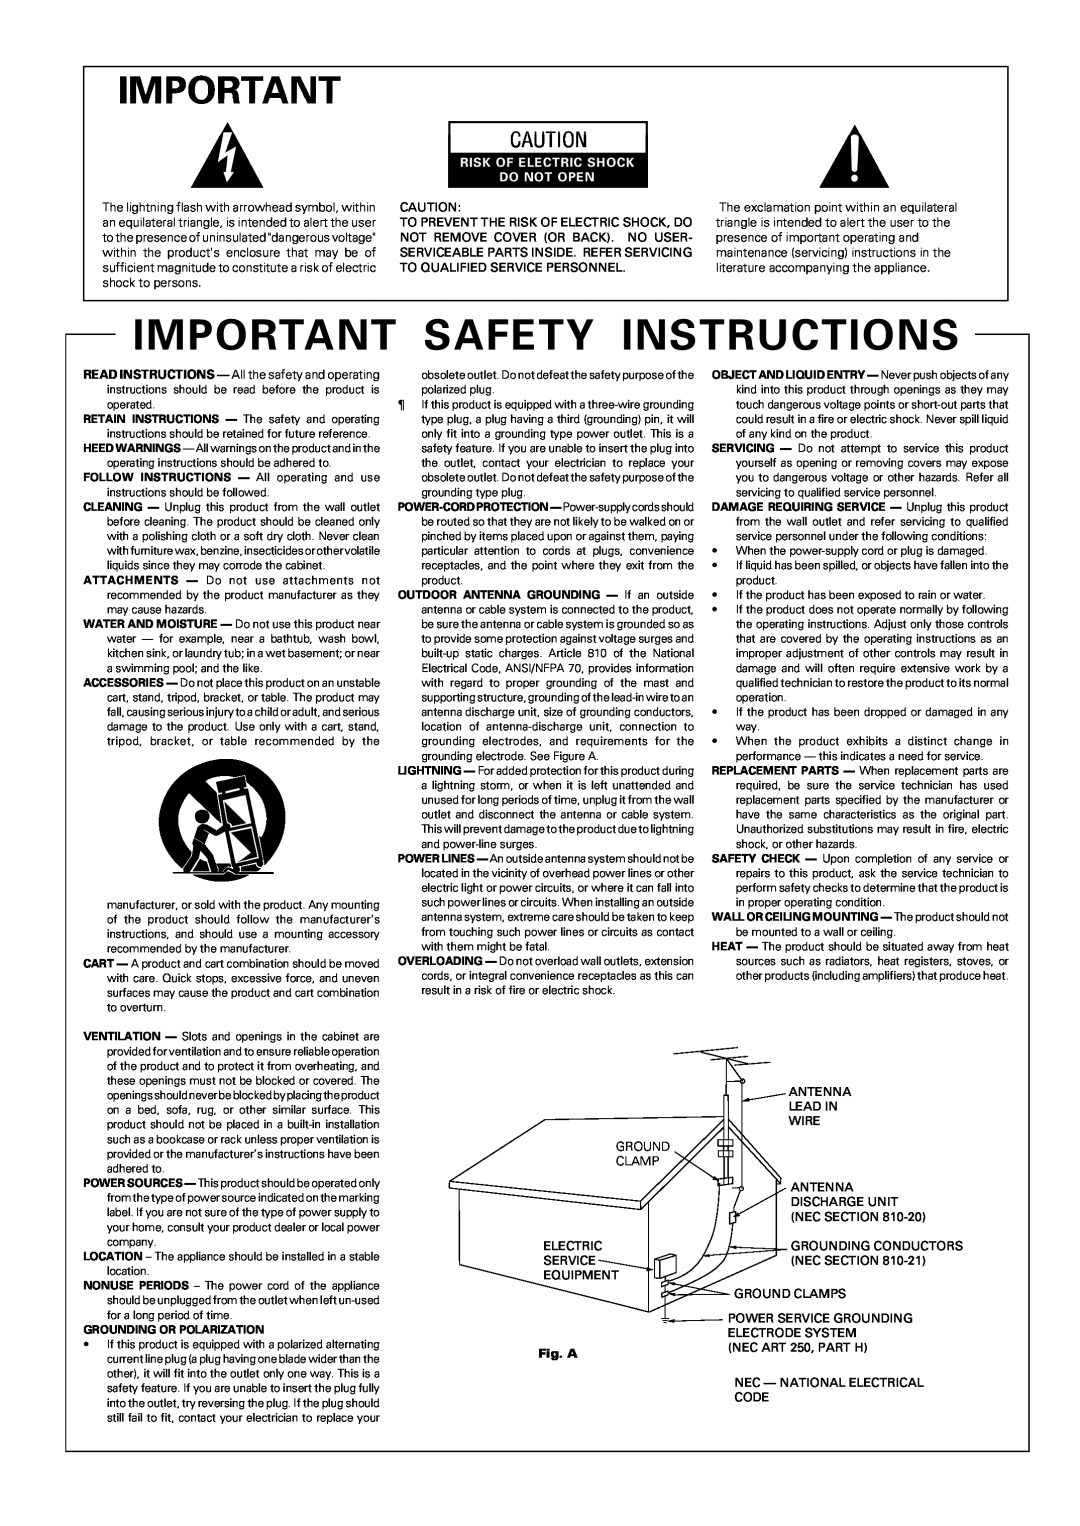 Pioneer PDR-W739 manual Important Safety Instructions, Risk Of Electric Shock Do Not Open, Fig. A 